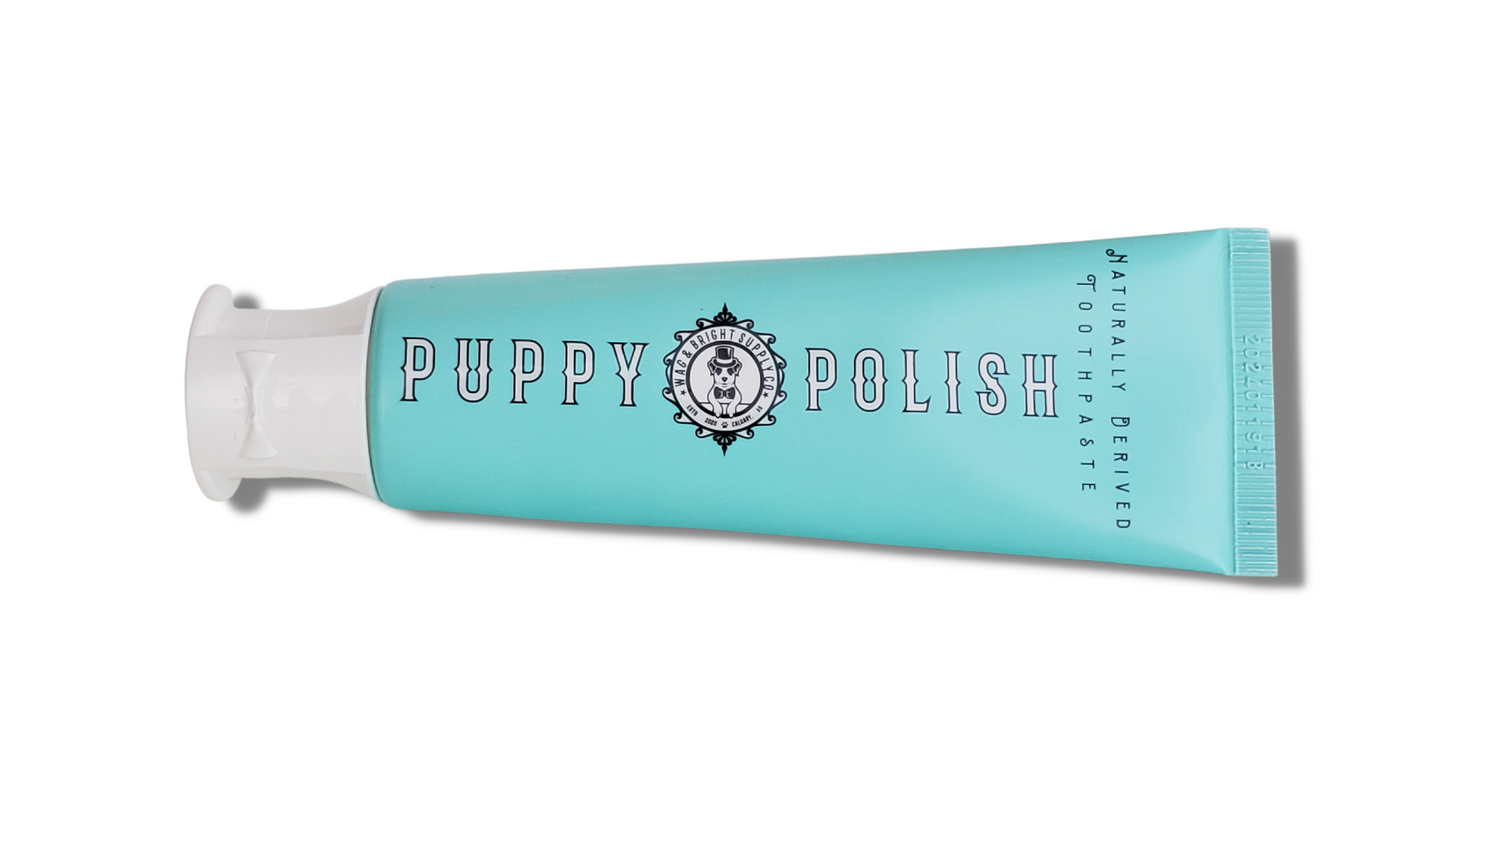 Wag & Bright Supply - Puppy Polish Natural Dog Toothpaste made with baking soda and coconut oil